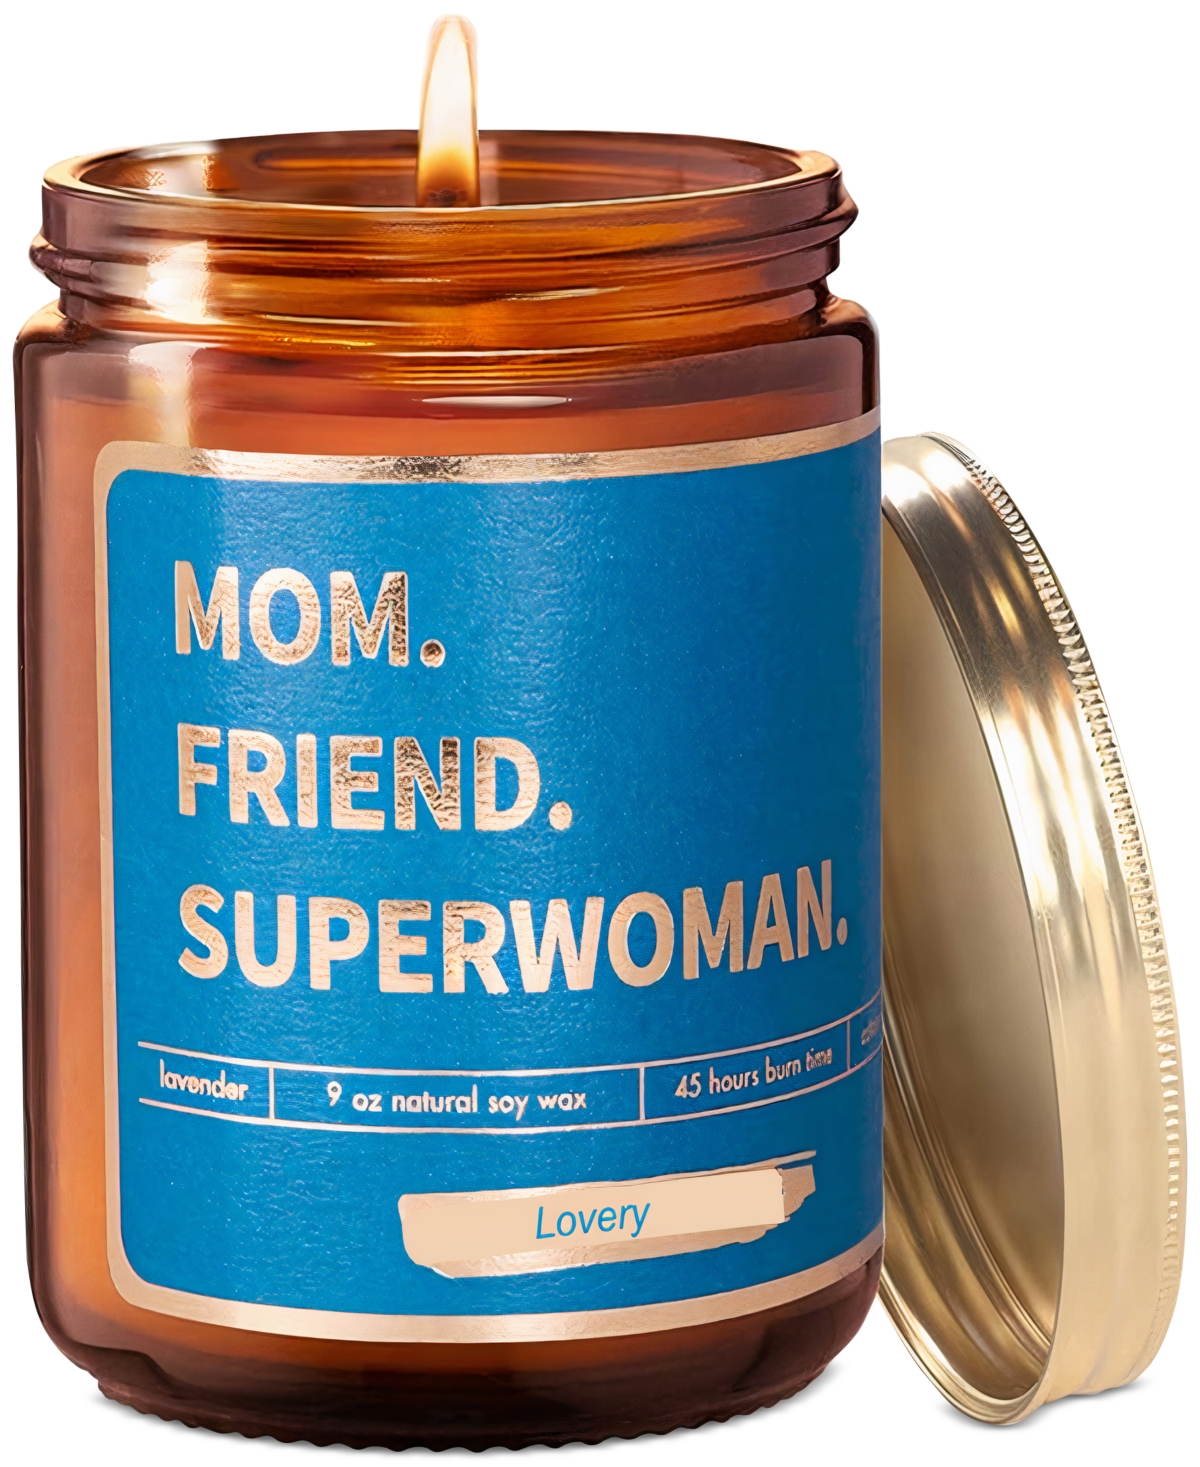 "Mom, Friend, Superwoman" Lavender-Scented Soy Wax Candle, 9 oz.